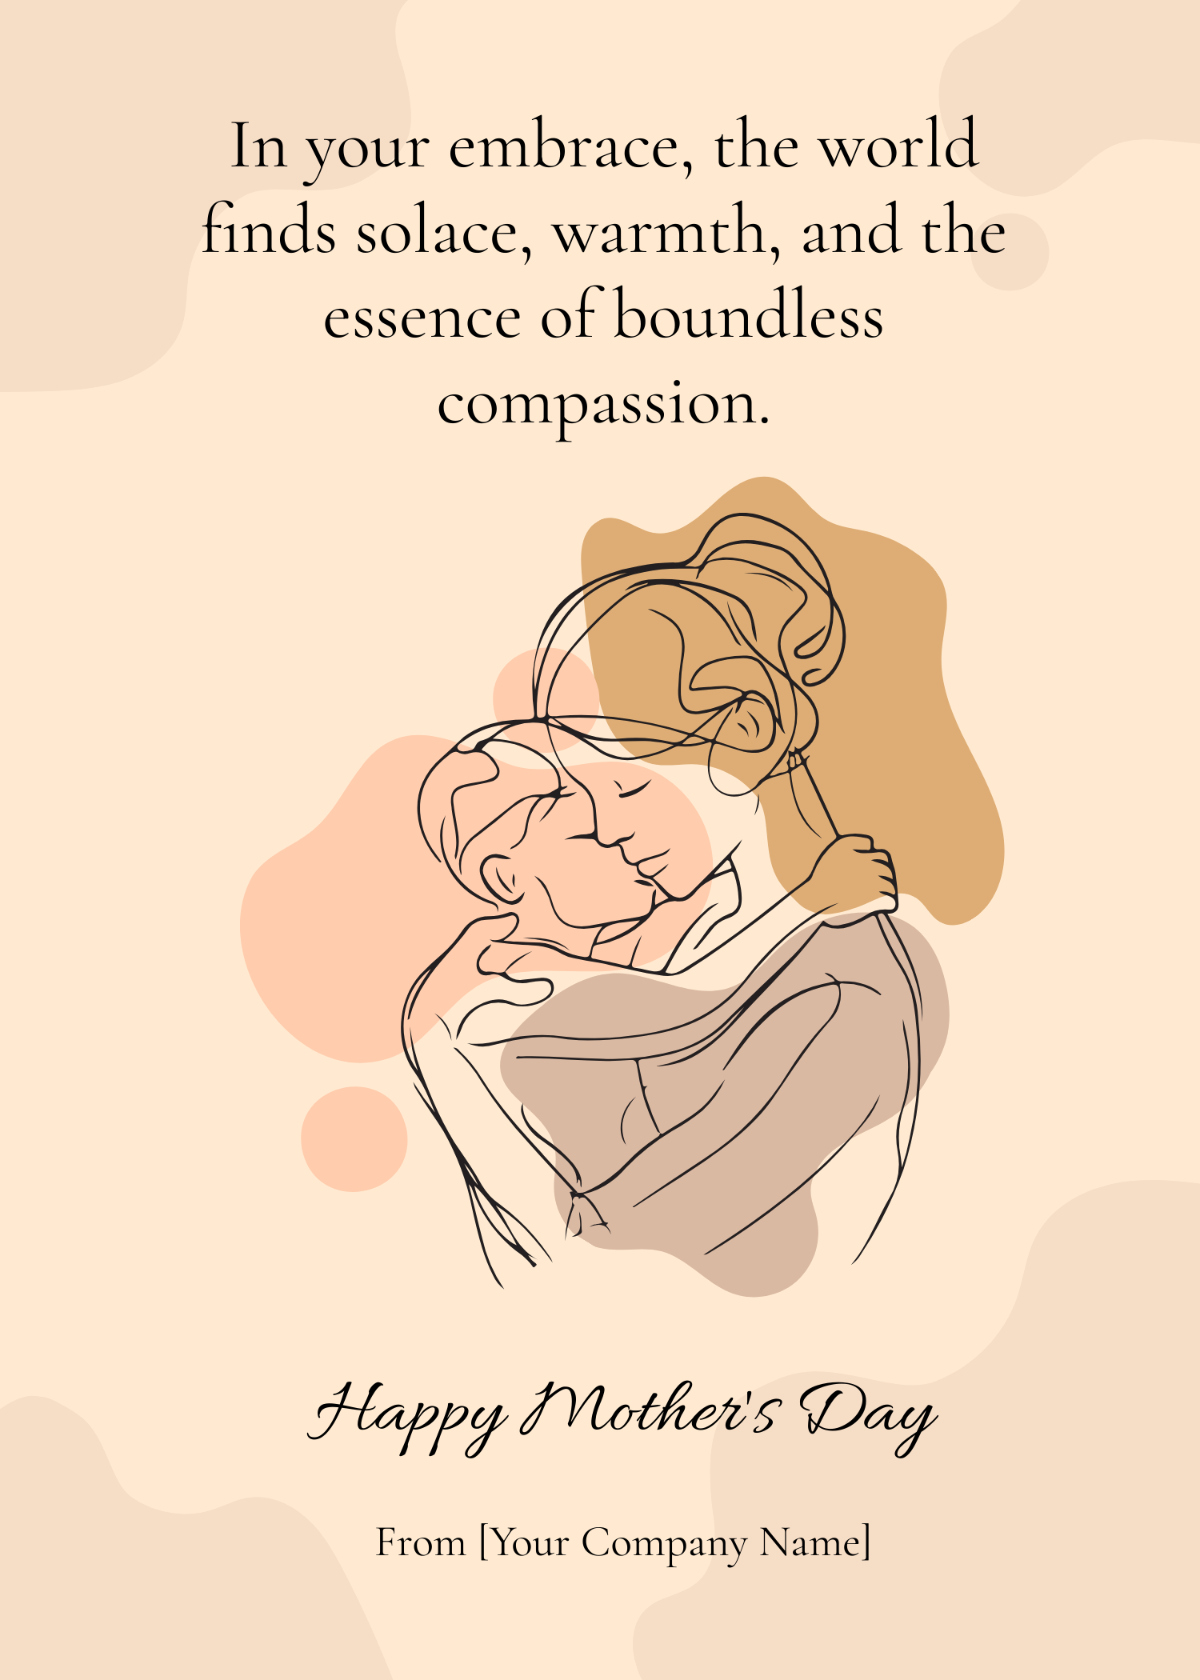 Mother's Day Message to all Mothers